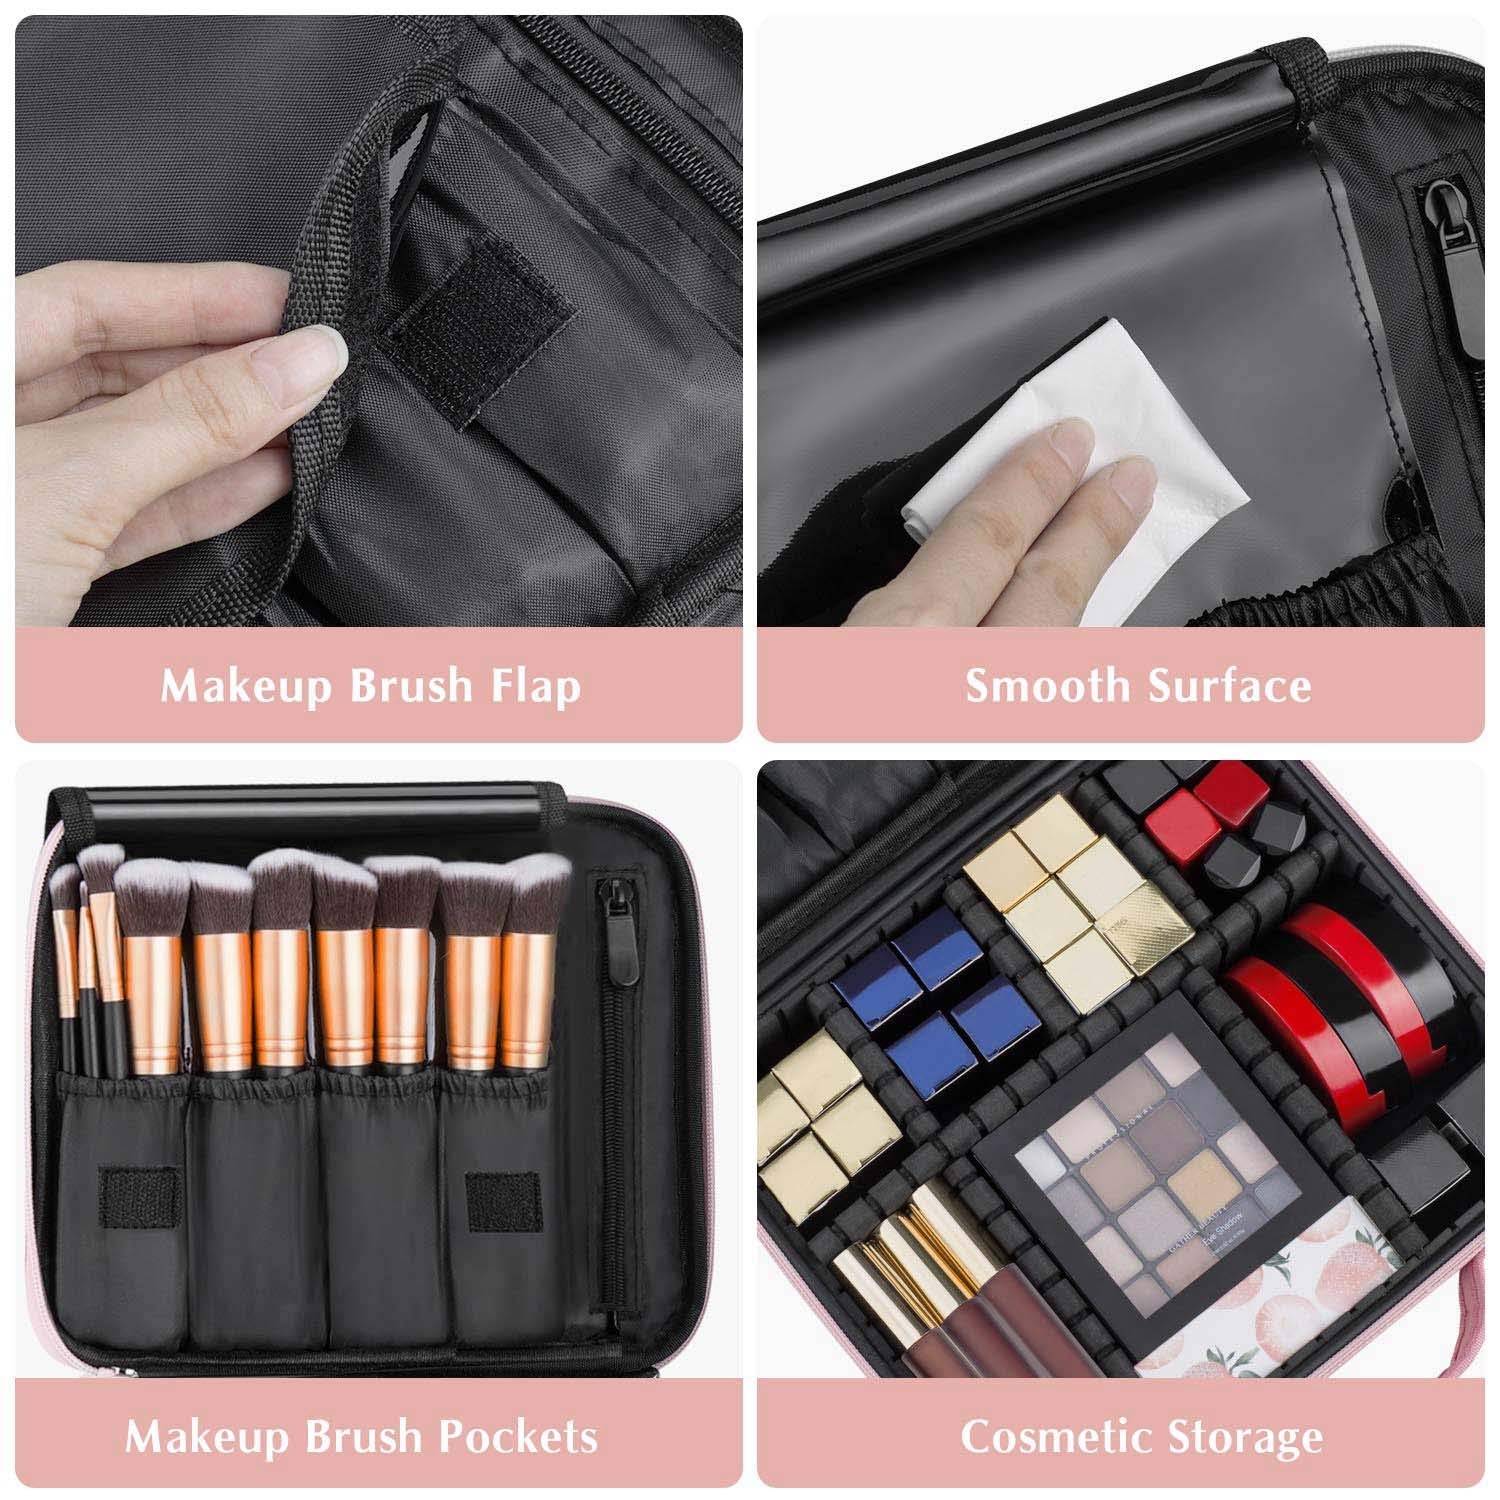  Nylon Professional Cosmetic Makeup Kit Storage Organizer Travel Toiletry Vanity Bag with Adjustable Compartment